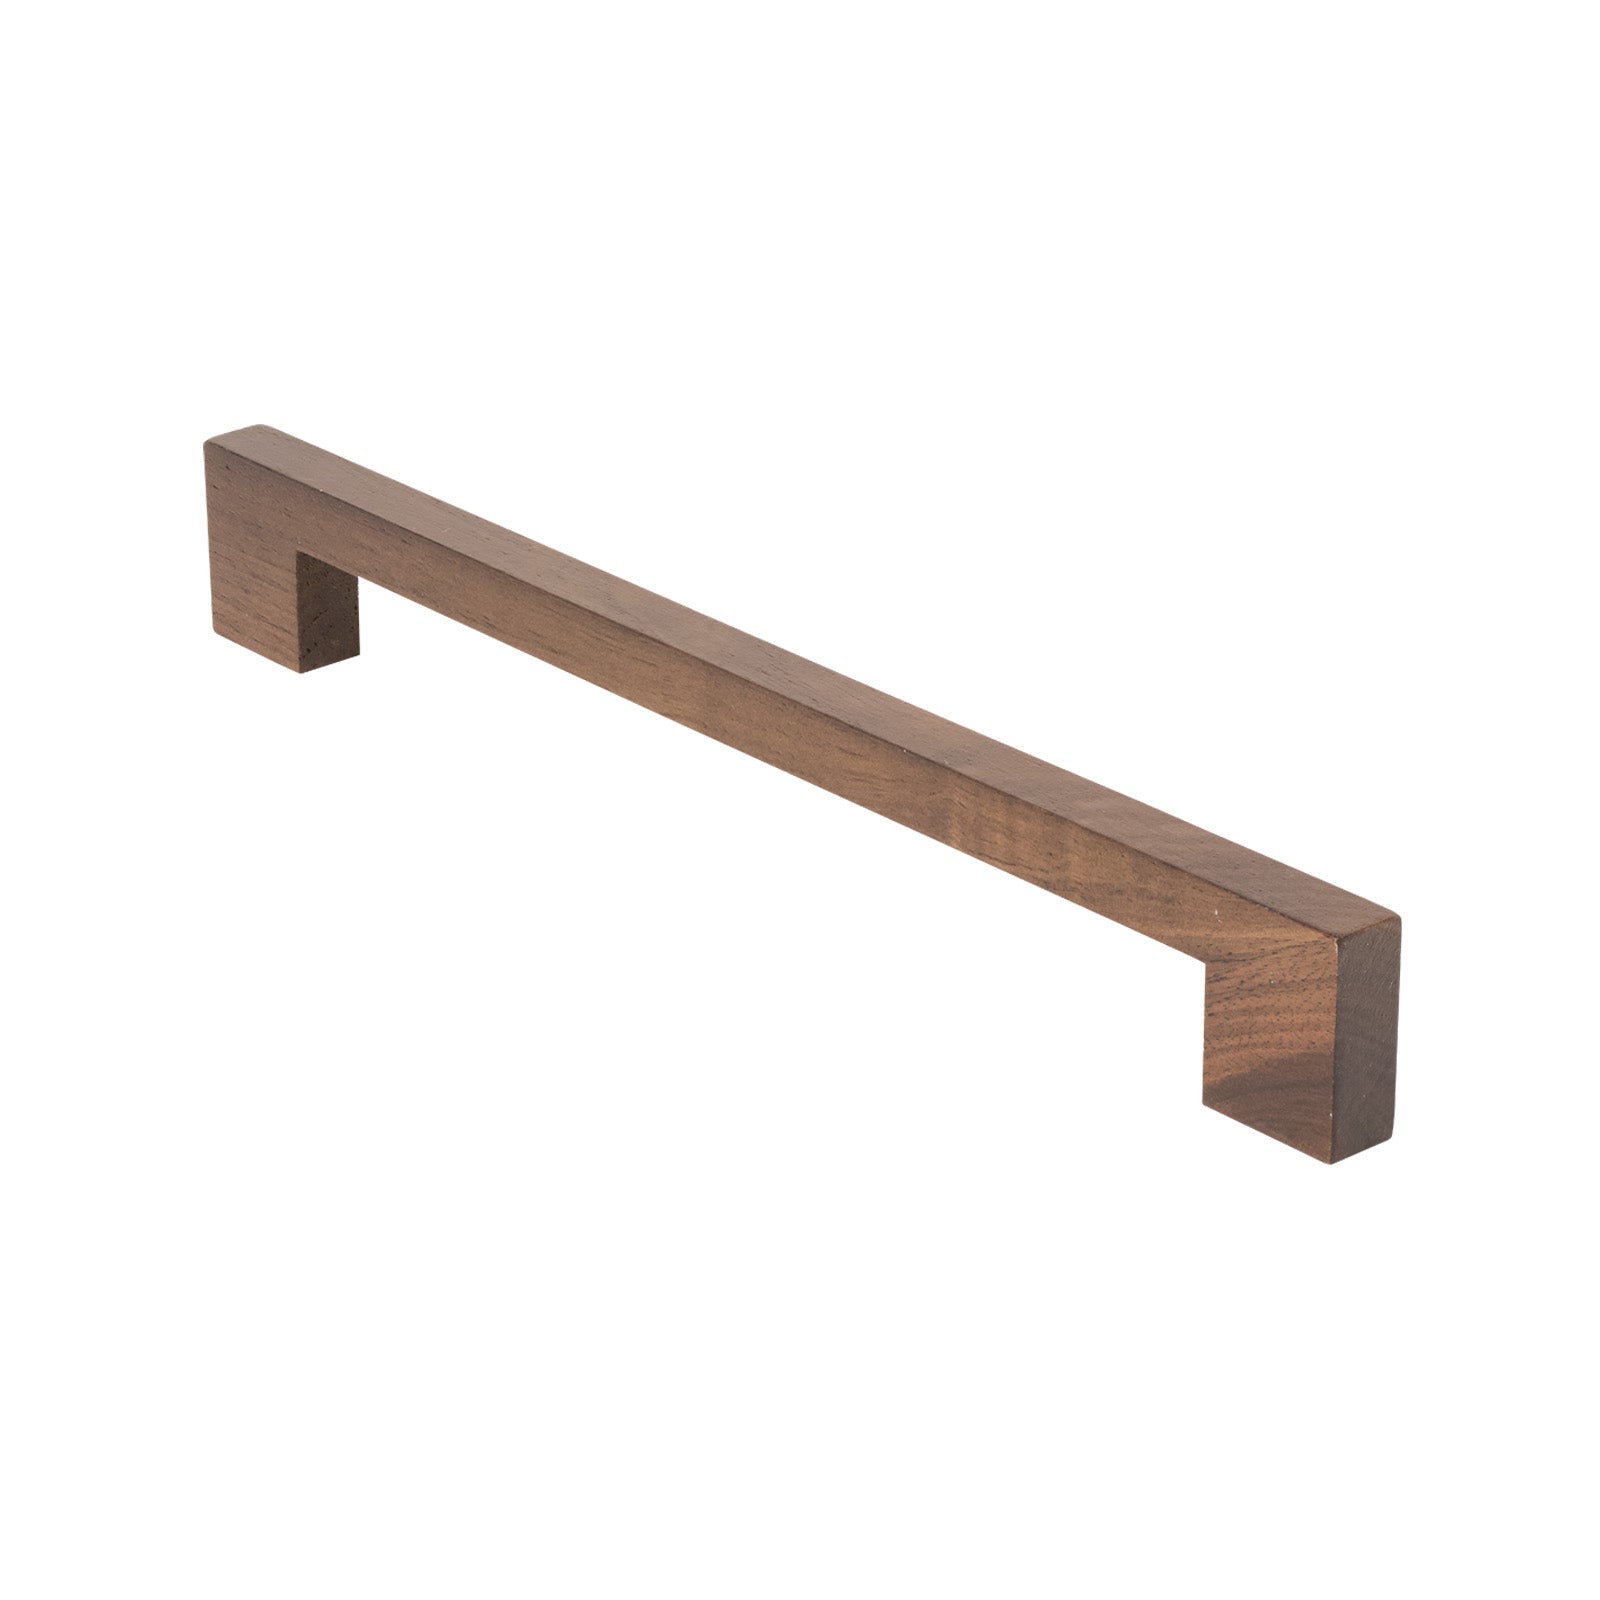 SHOW 224mm Metro Cabinet Pull Handle In Walnut Finish